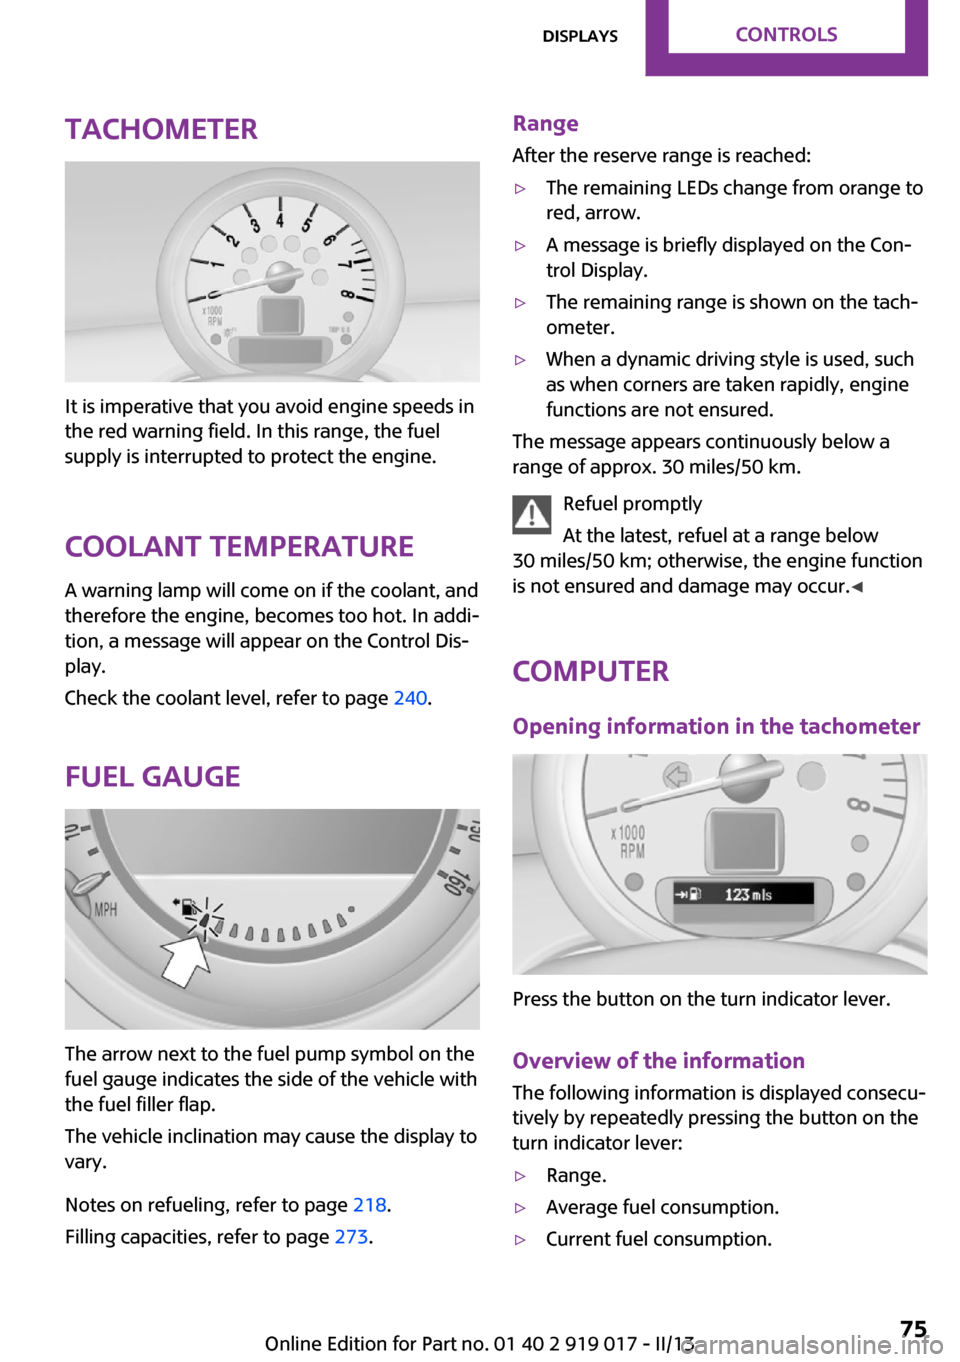 MINI Roadster 2013  Owners Manual Tachometer
It is imperative that you avoid engine speeds in
the red warning field. In this range, the fuel
supply is interrupted to protect the engine.
Coolant temperature A warning lamp will come on 